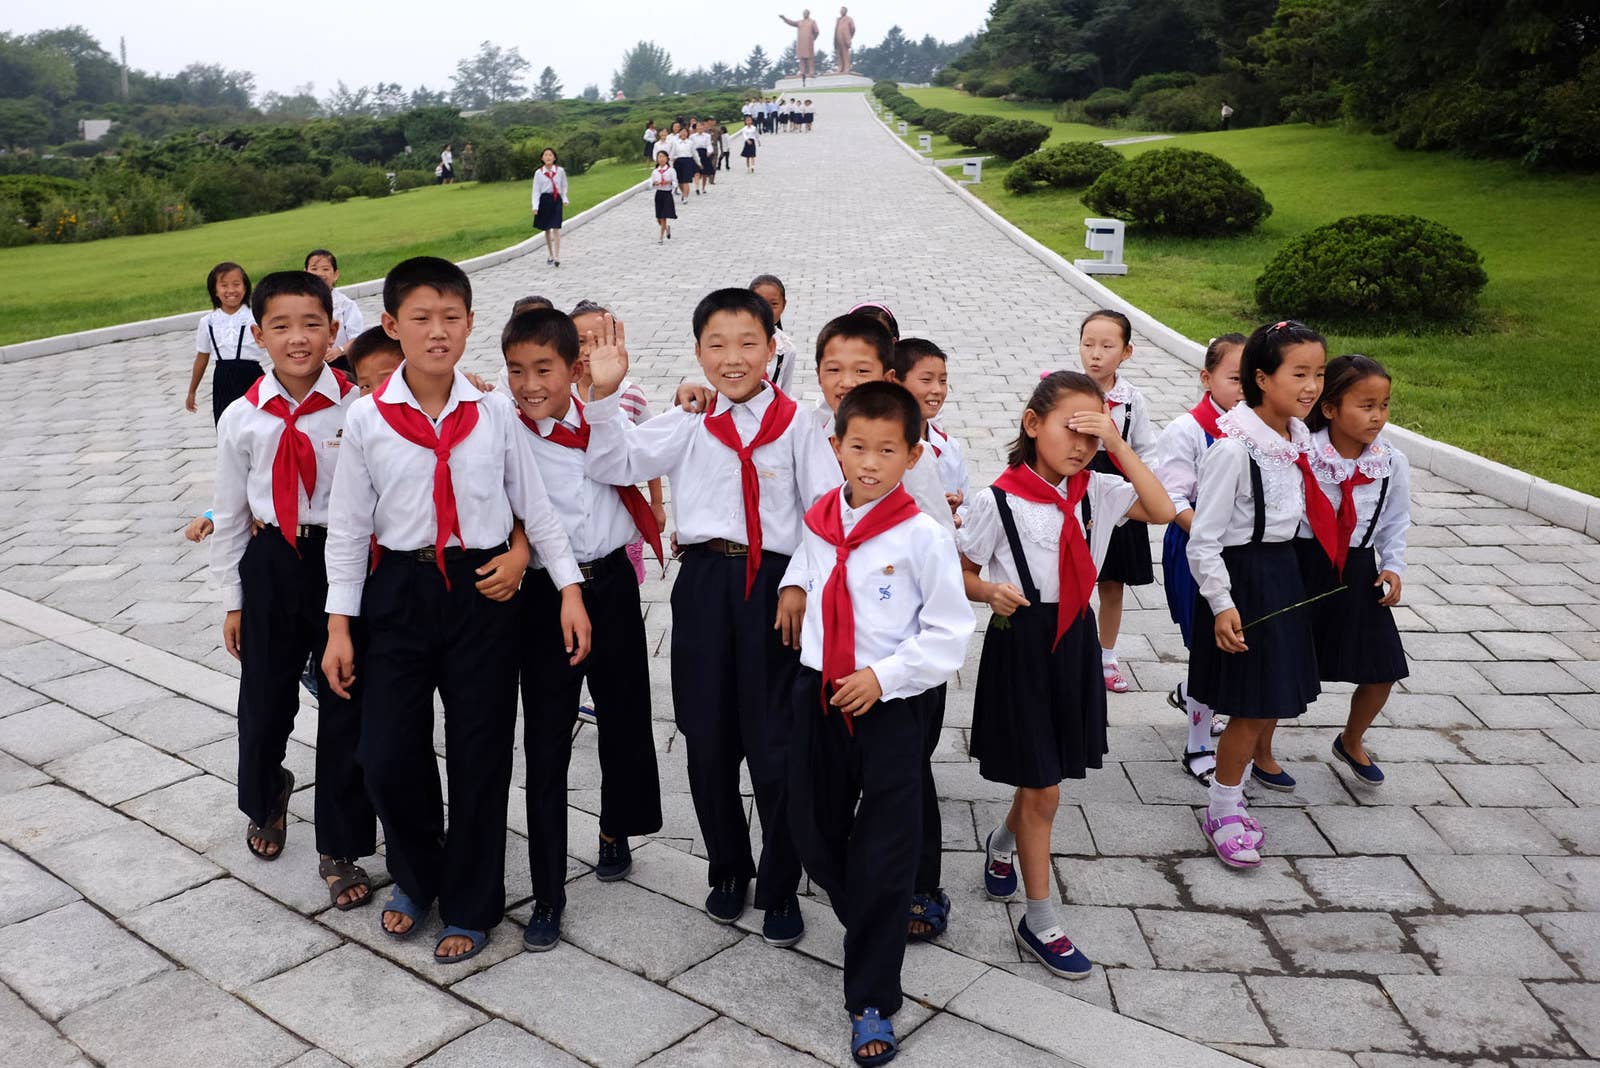 Schoolchildren make their way from the leaders' statues in central Hamhung.